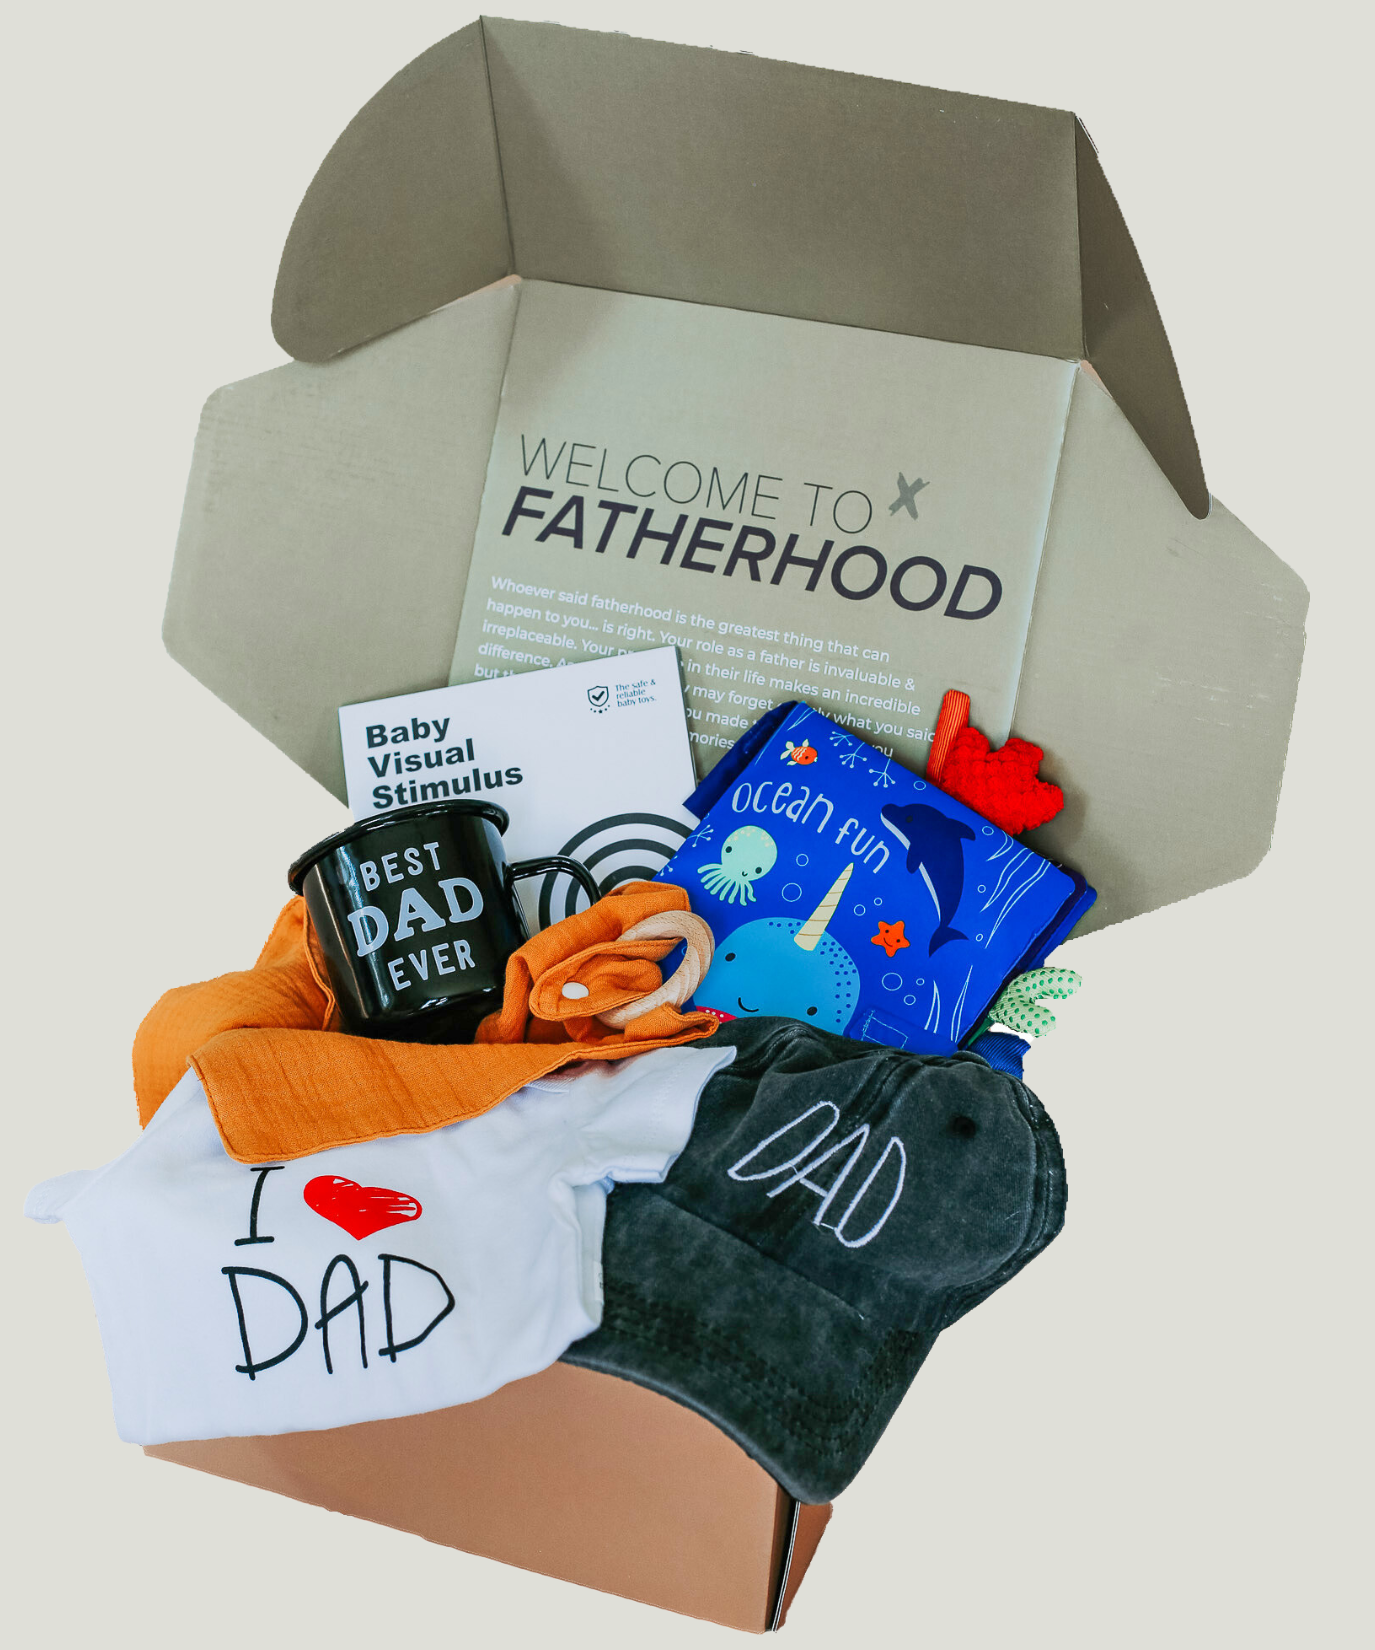 New Dad Gift – BeWishedGifts